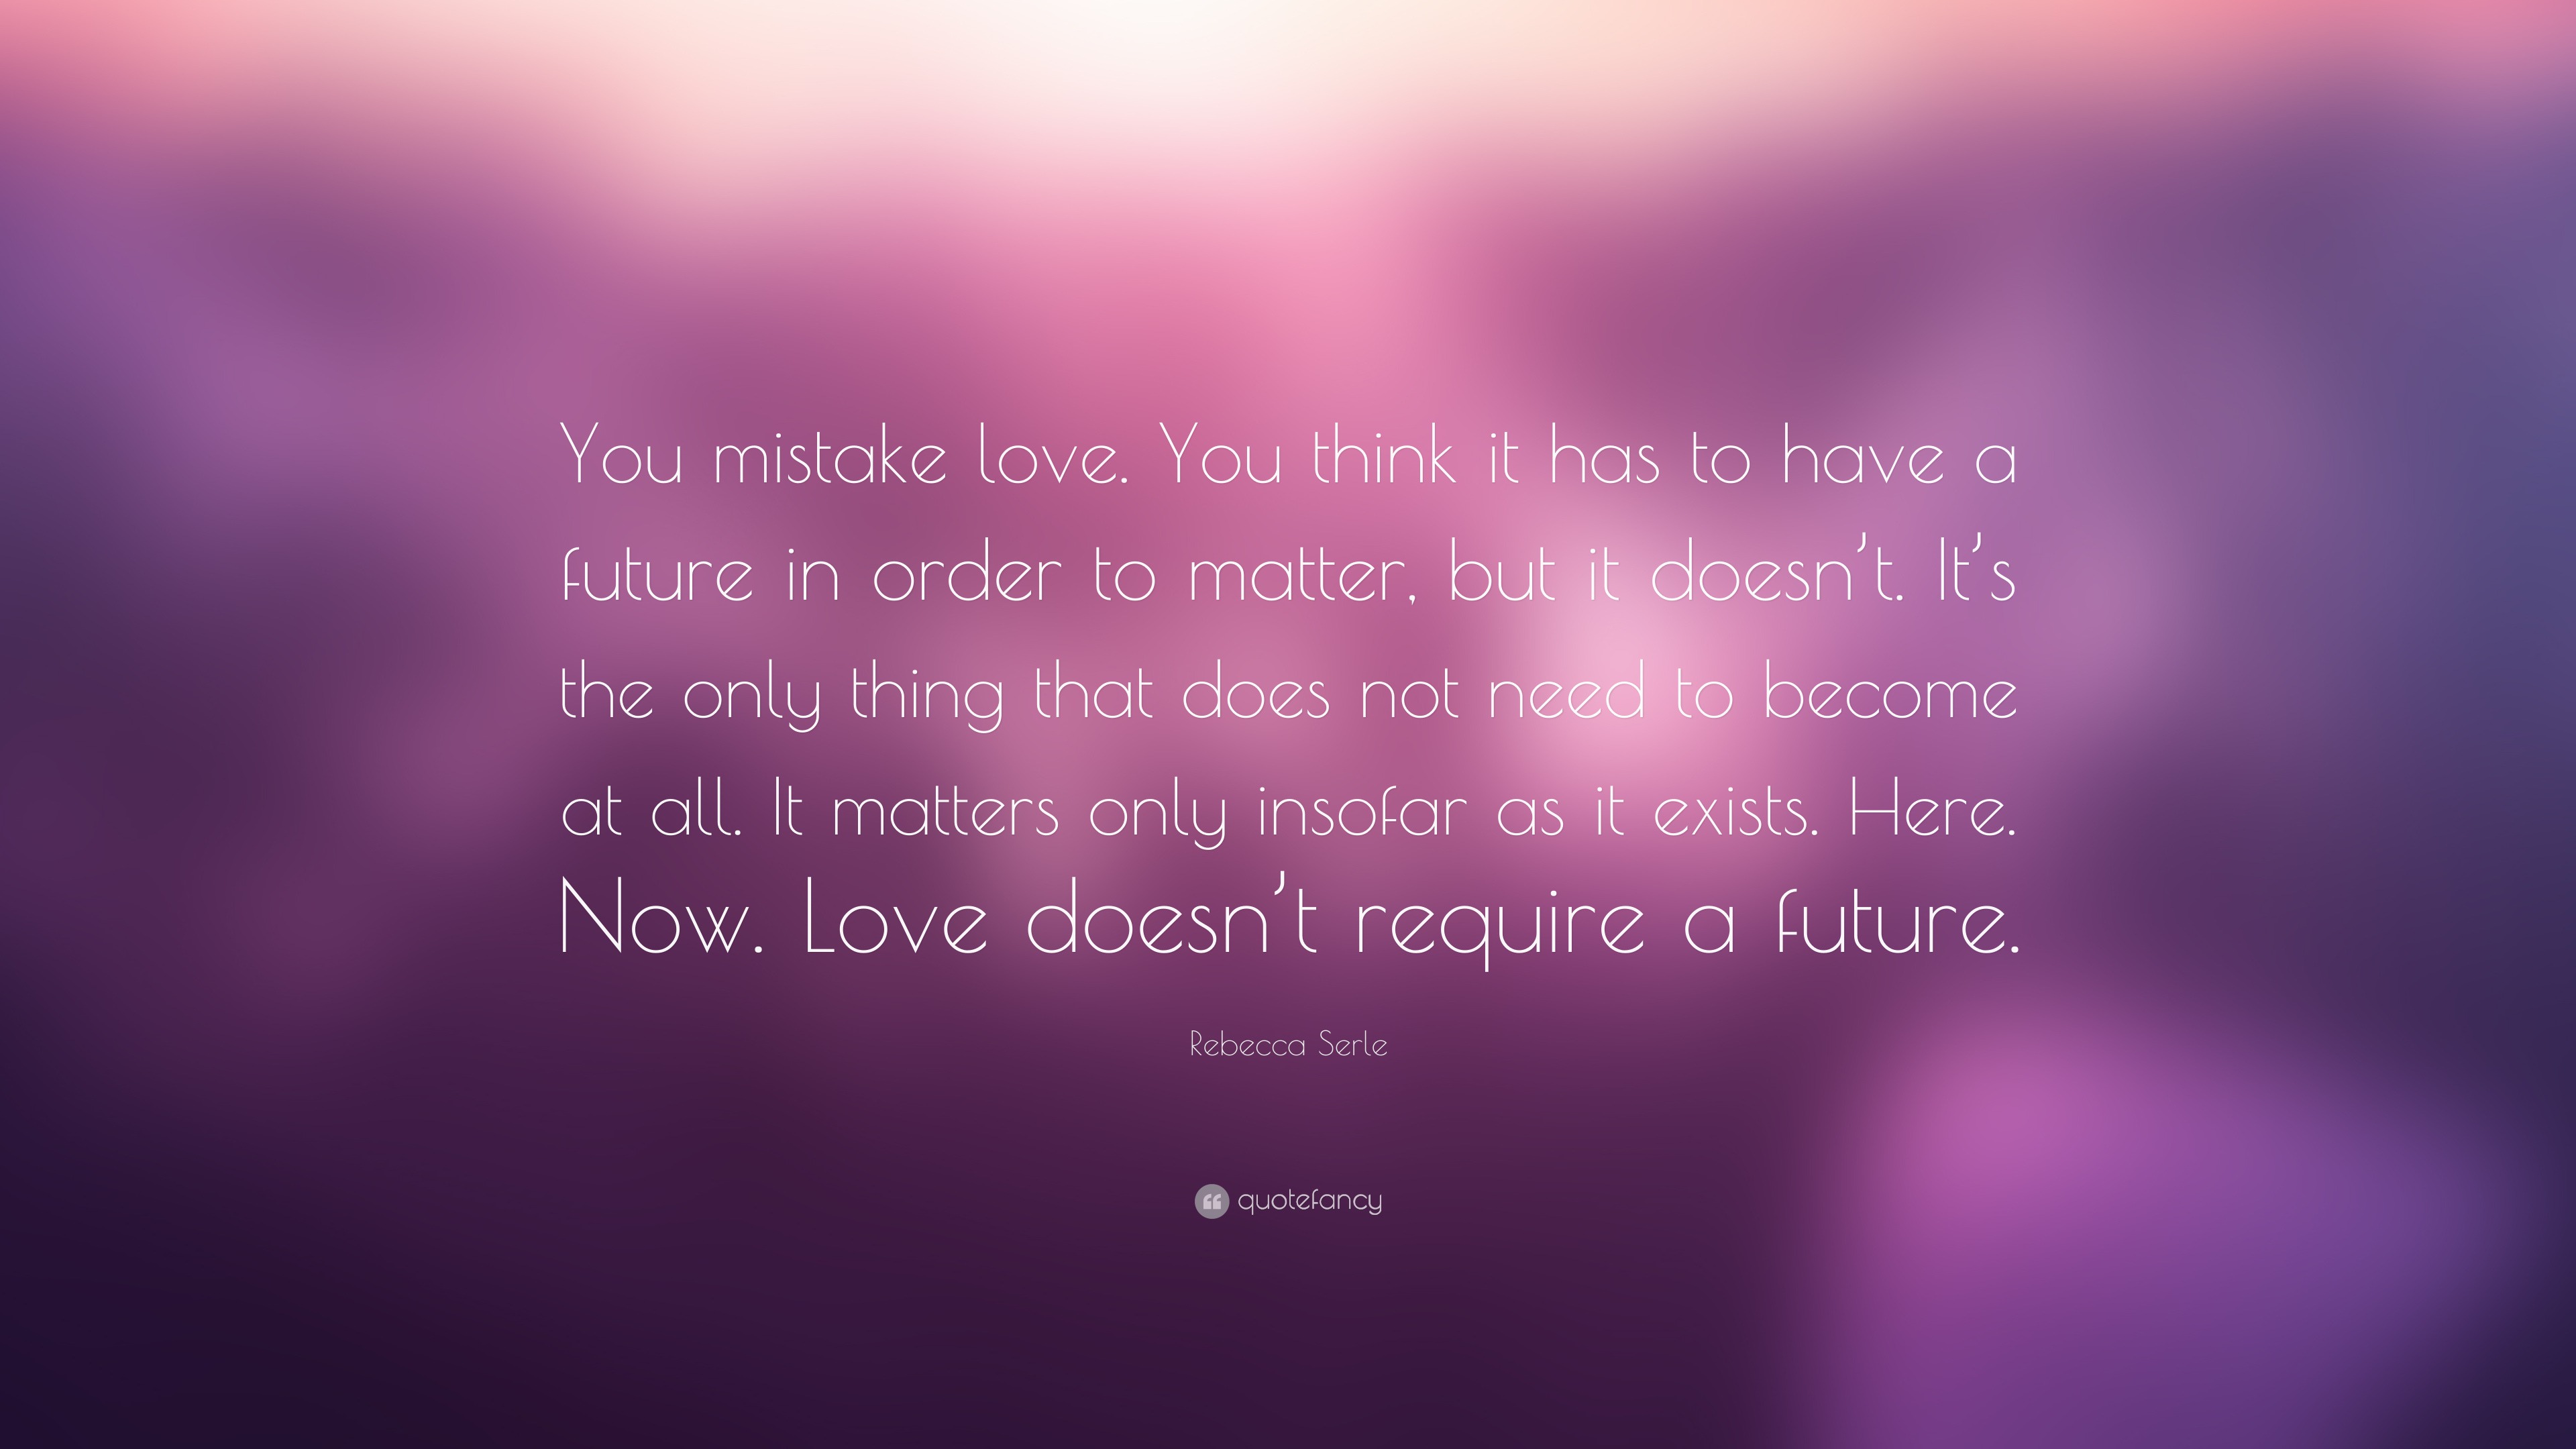 Rebecca Serle Quote: “You mistake love. You think it has to have a ...